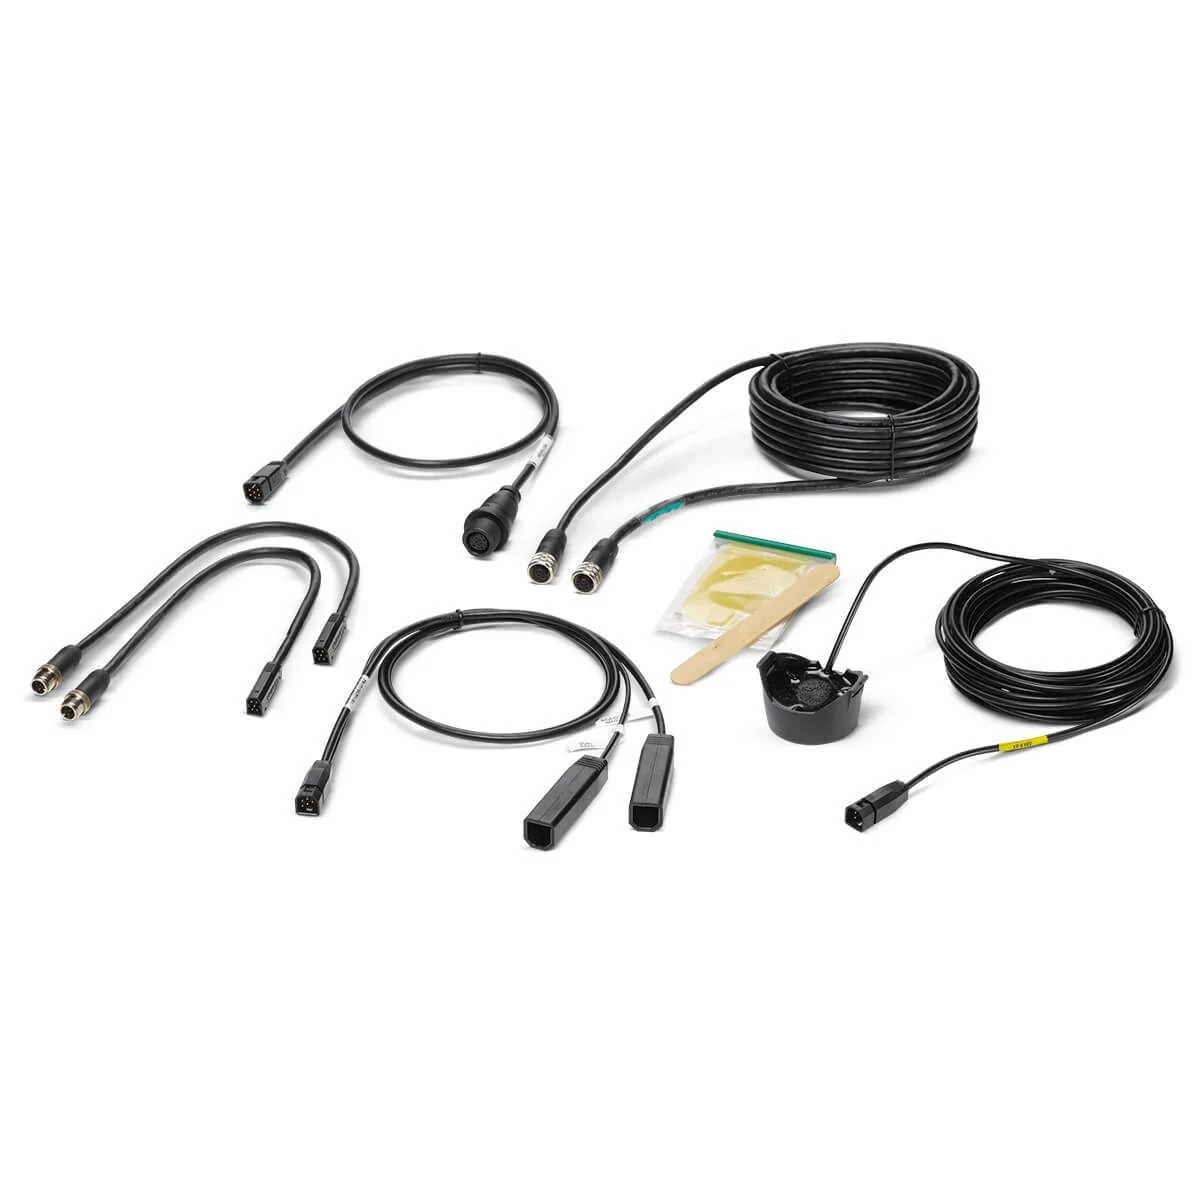 Transducer, epoxy, ethernet cables, adapters, and splitter cables